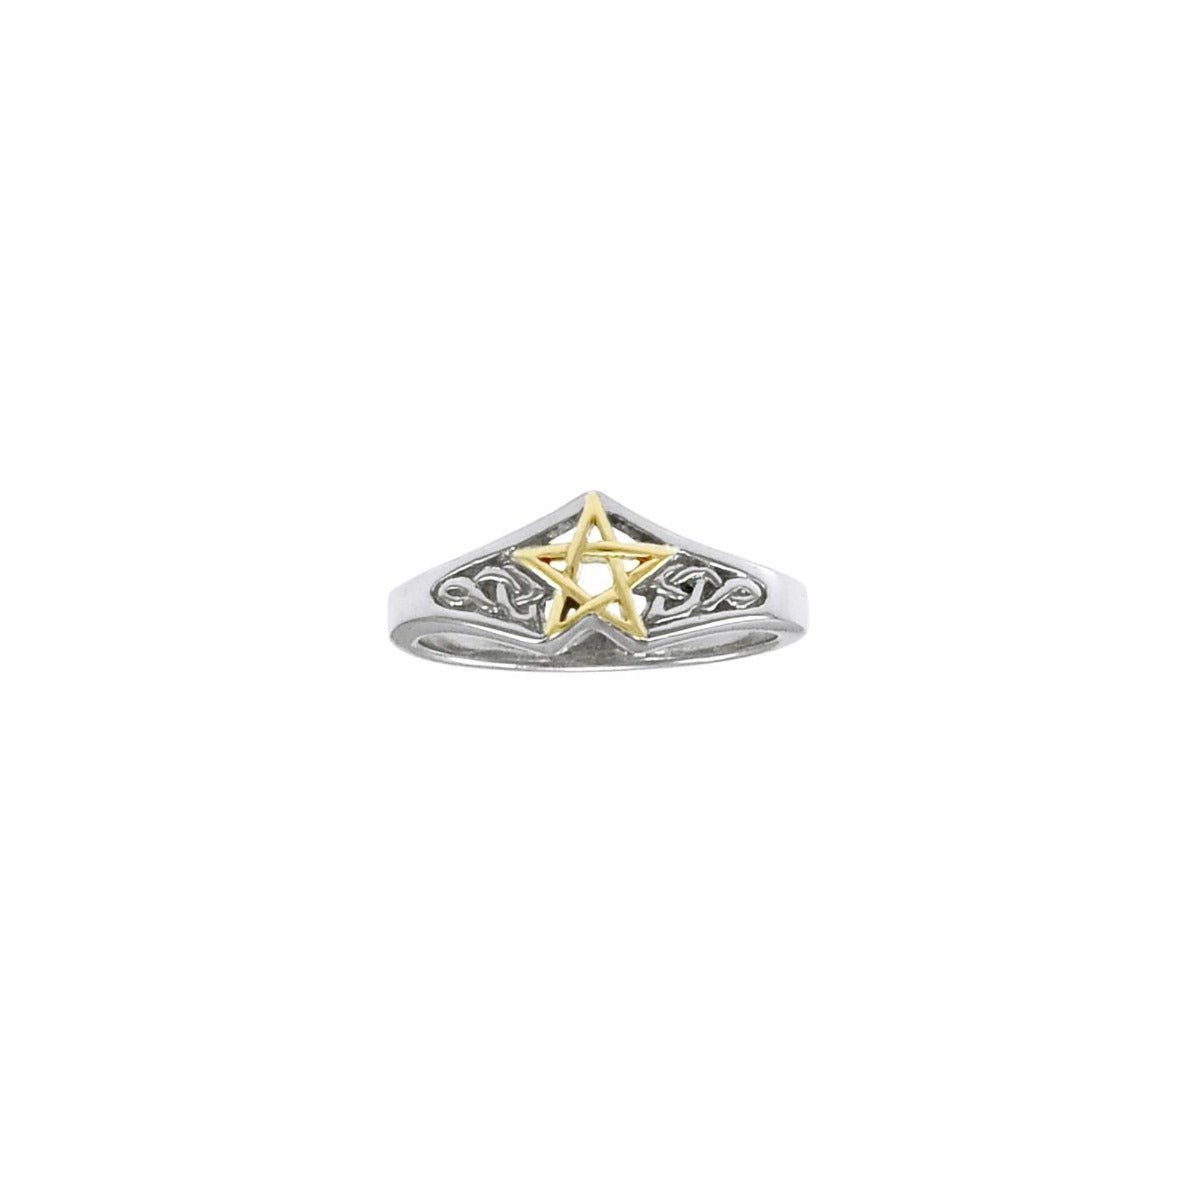 Celtic Pentacle Ring in Gold and Silver - 13 Moons